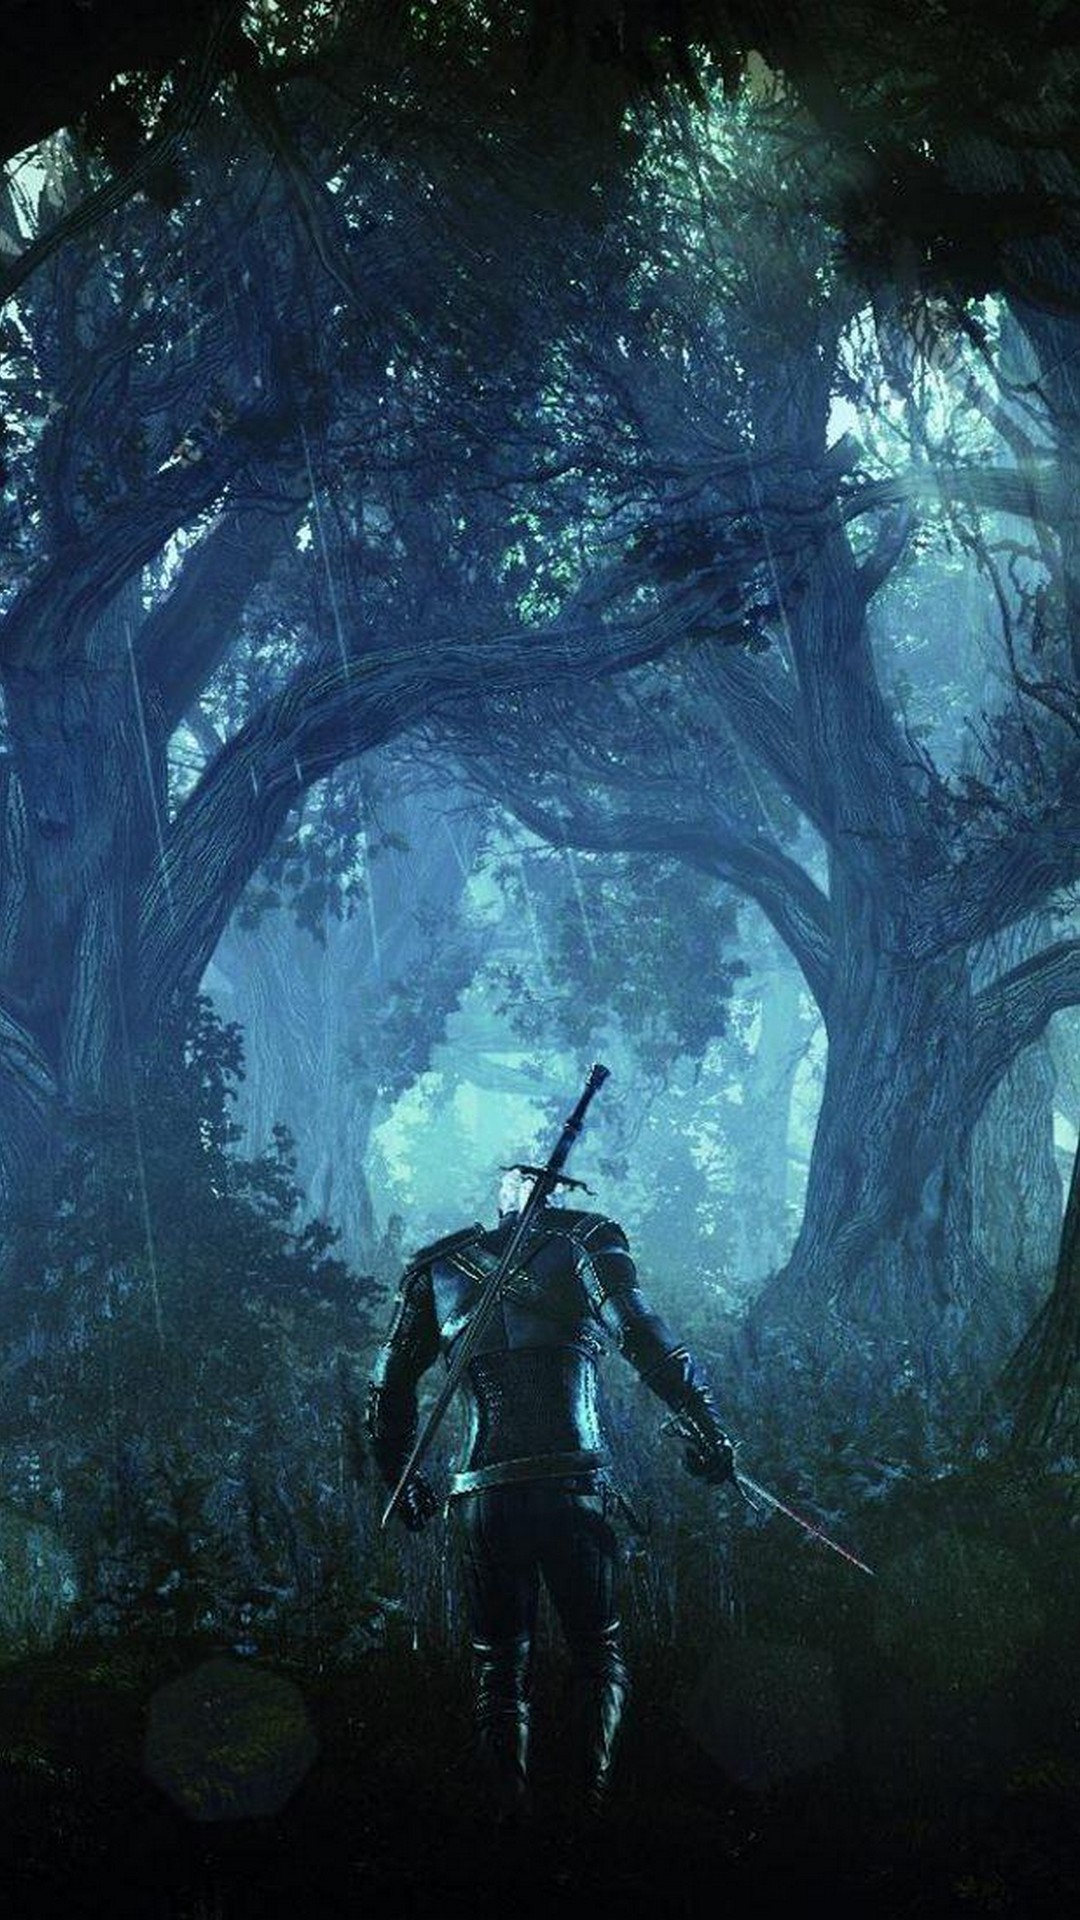 The Witcher iPhone 7 Wallpaper HD With high-resolution 1080X1920 pixel. Download all Mobile Wallpapers and Use them as wallpapers for your iPhone, Tablet, iPad, Android and other mobile devices